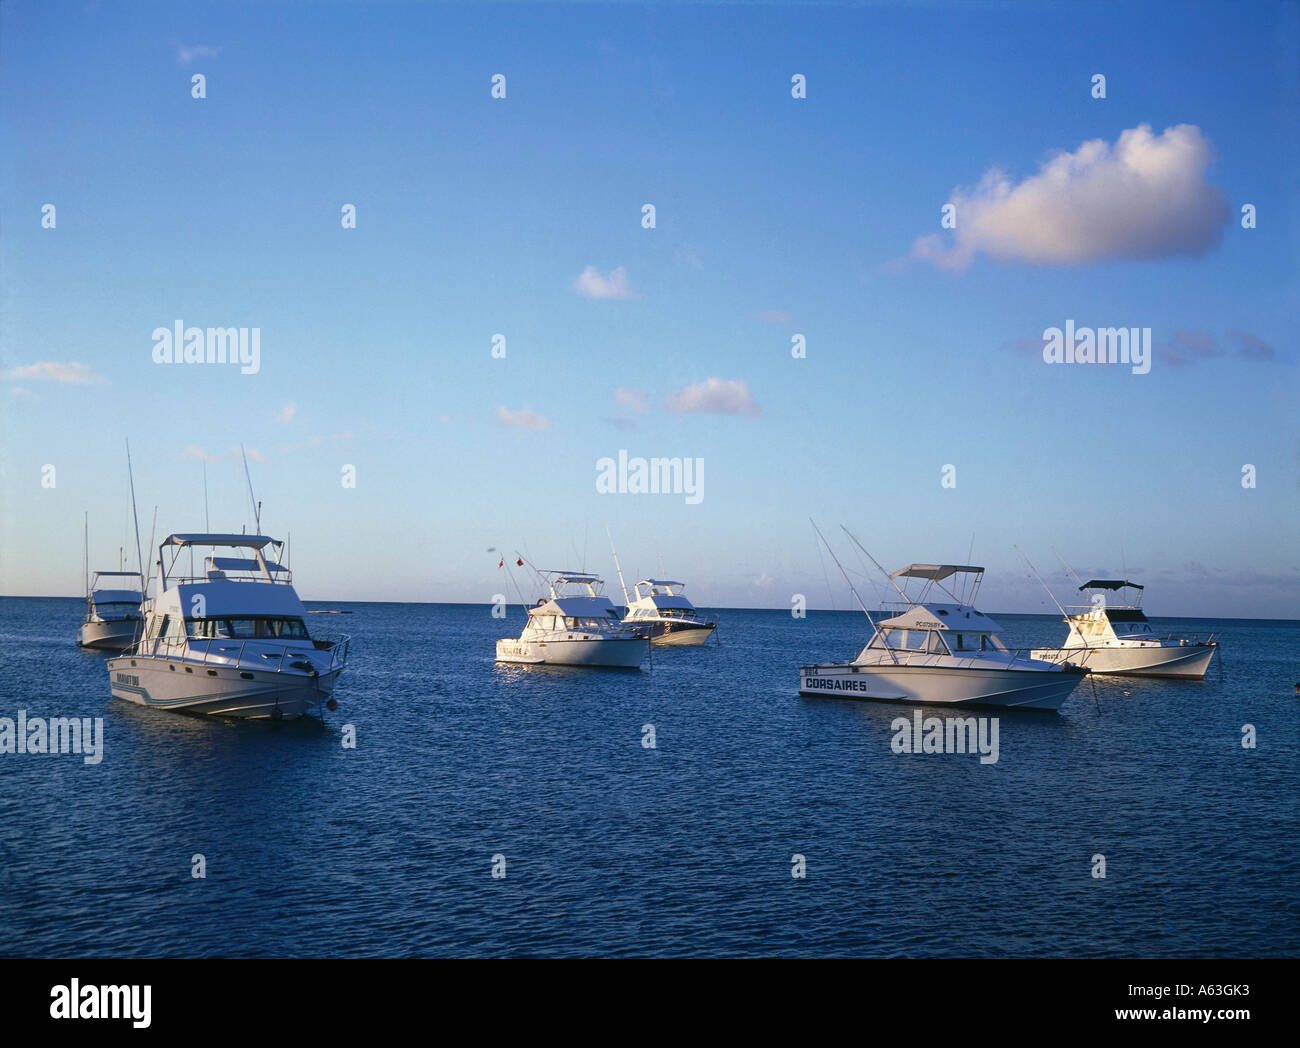 Motorboats in sea, Troux-aux-biches, Mauritius Stock Photo